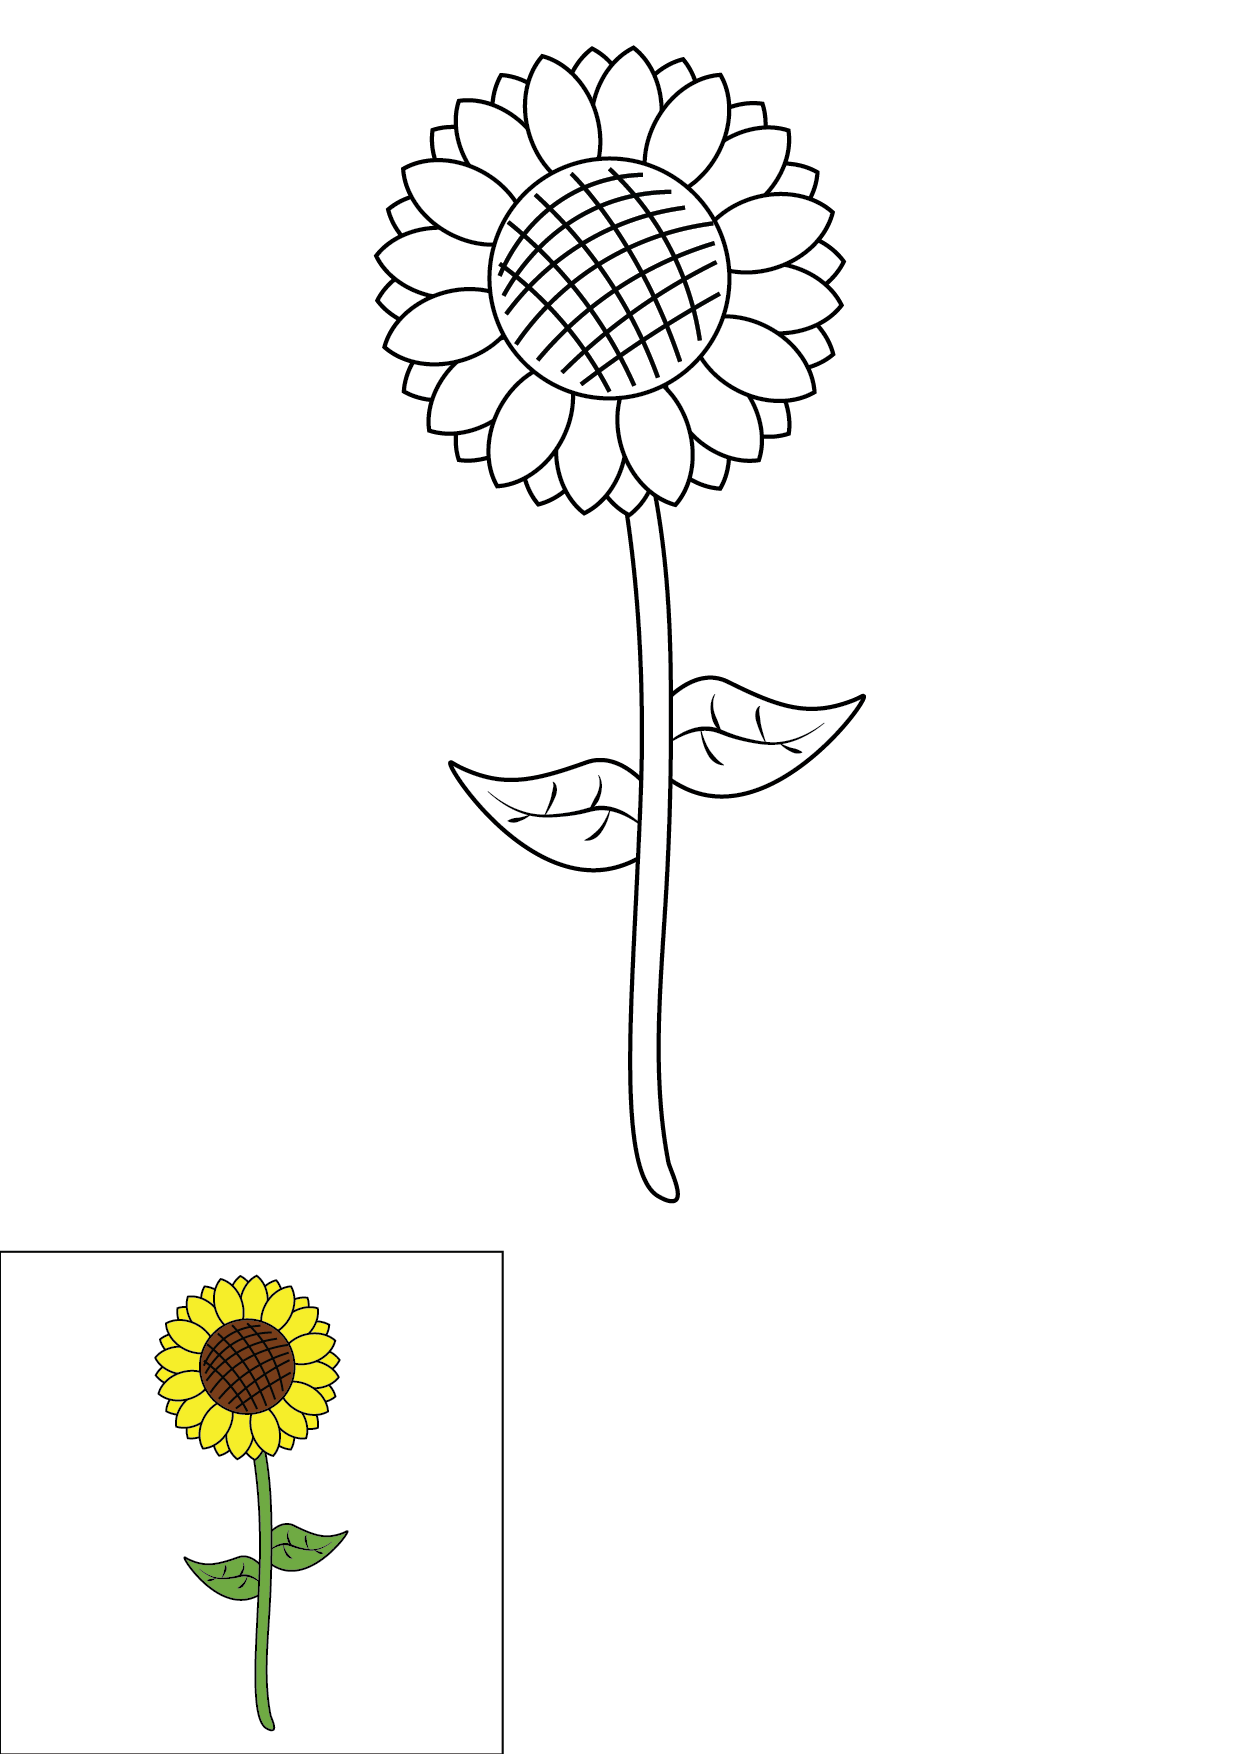 How to Draw A Sunflower Step by Step Printable Color